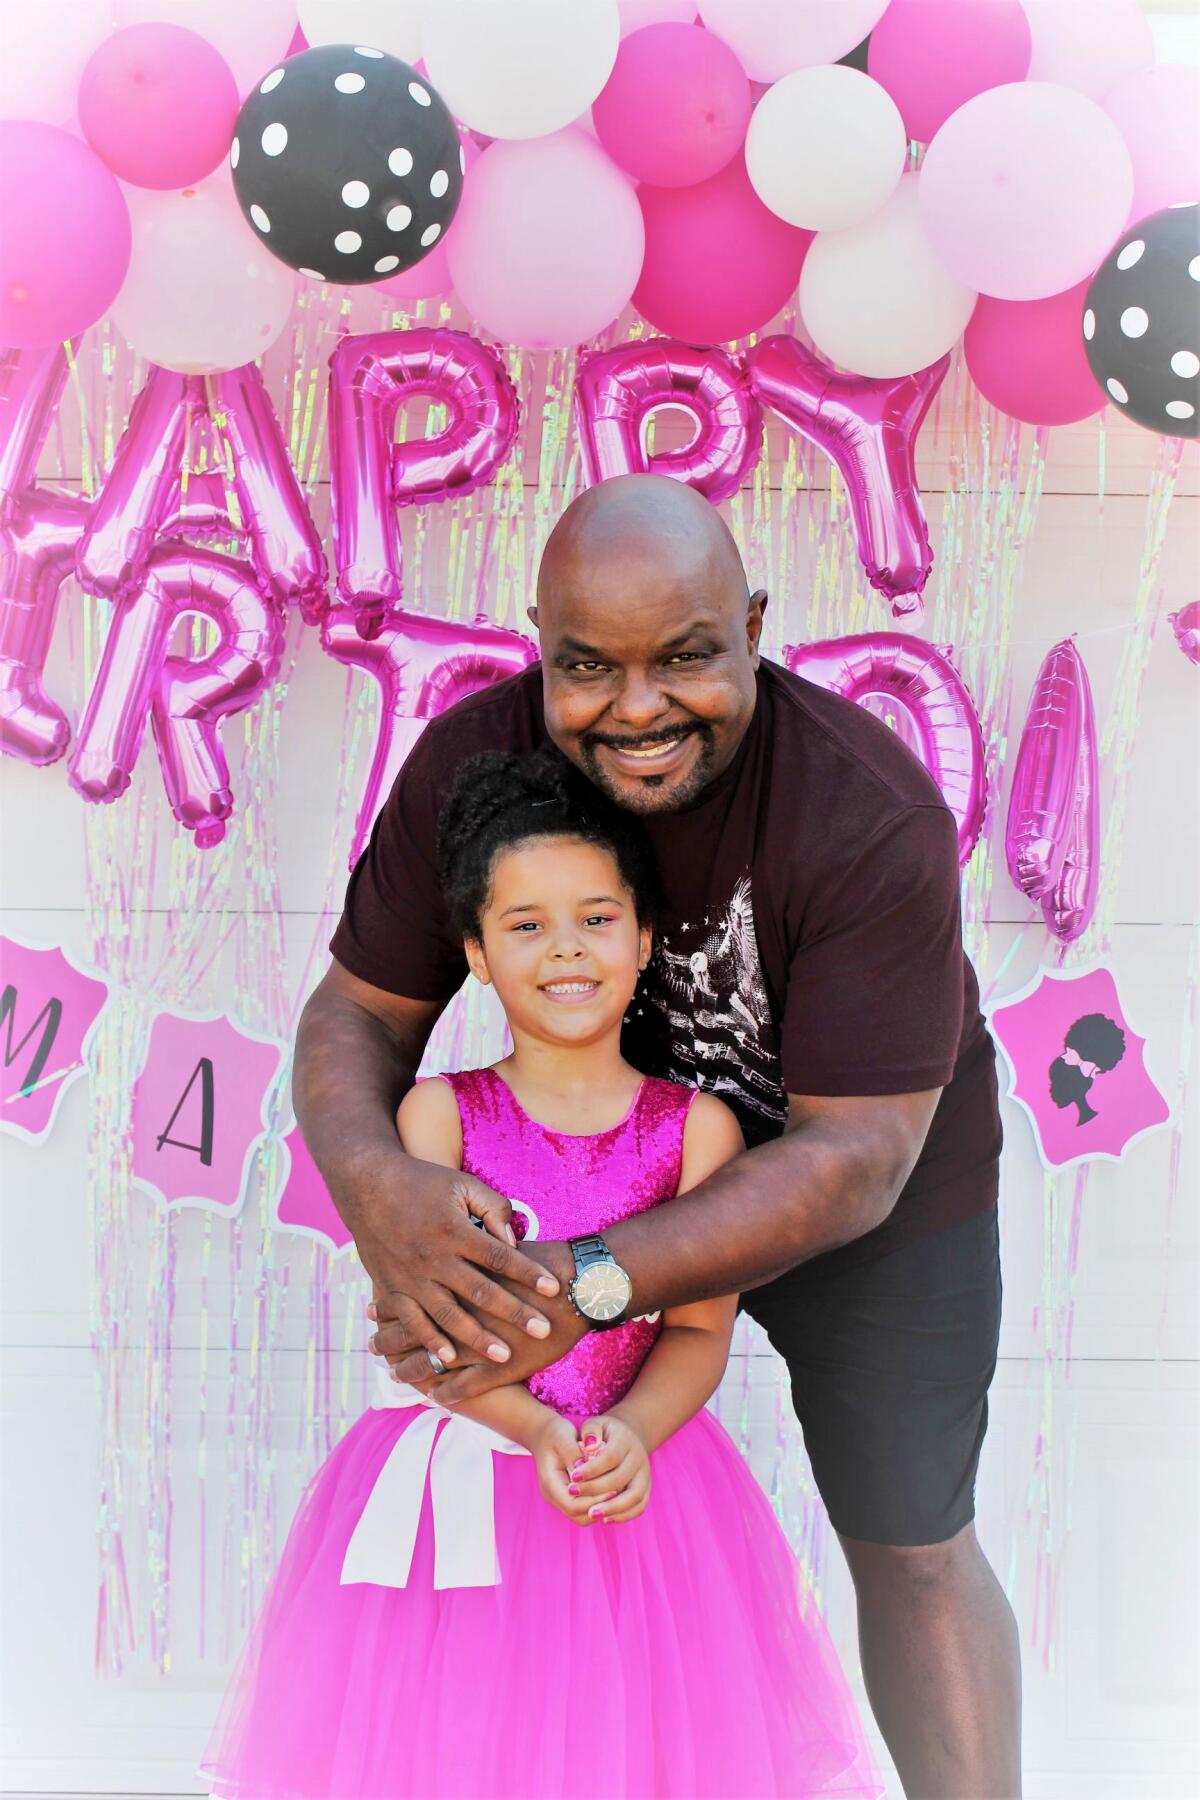 Kevin Fairman with his daughter Marley during a party on her sixth birthday on Oct. 19, 2020.